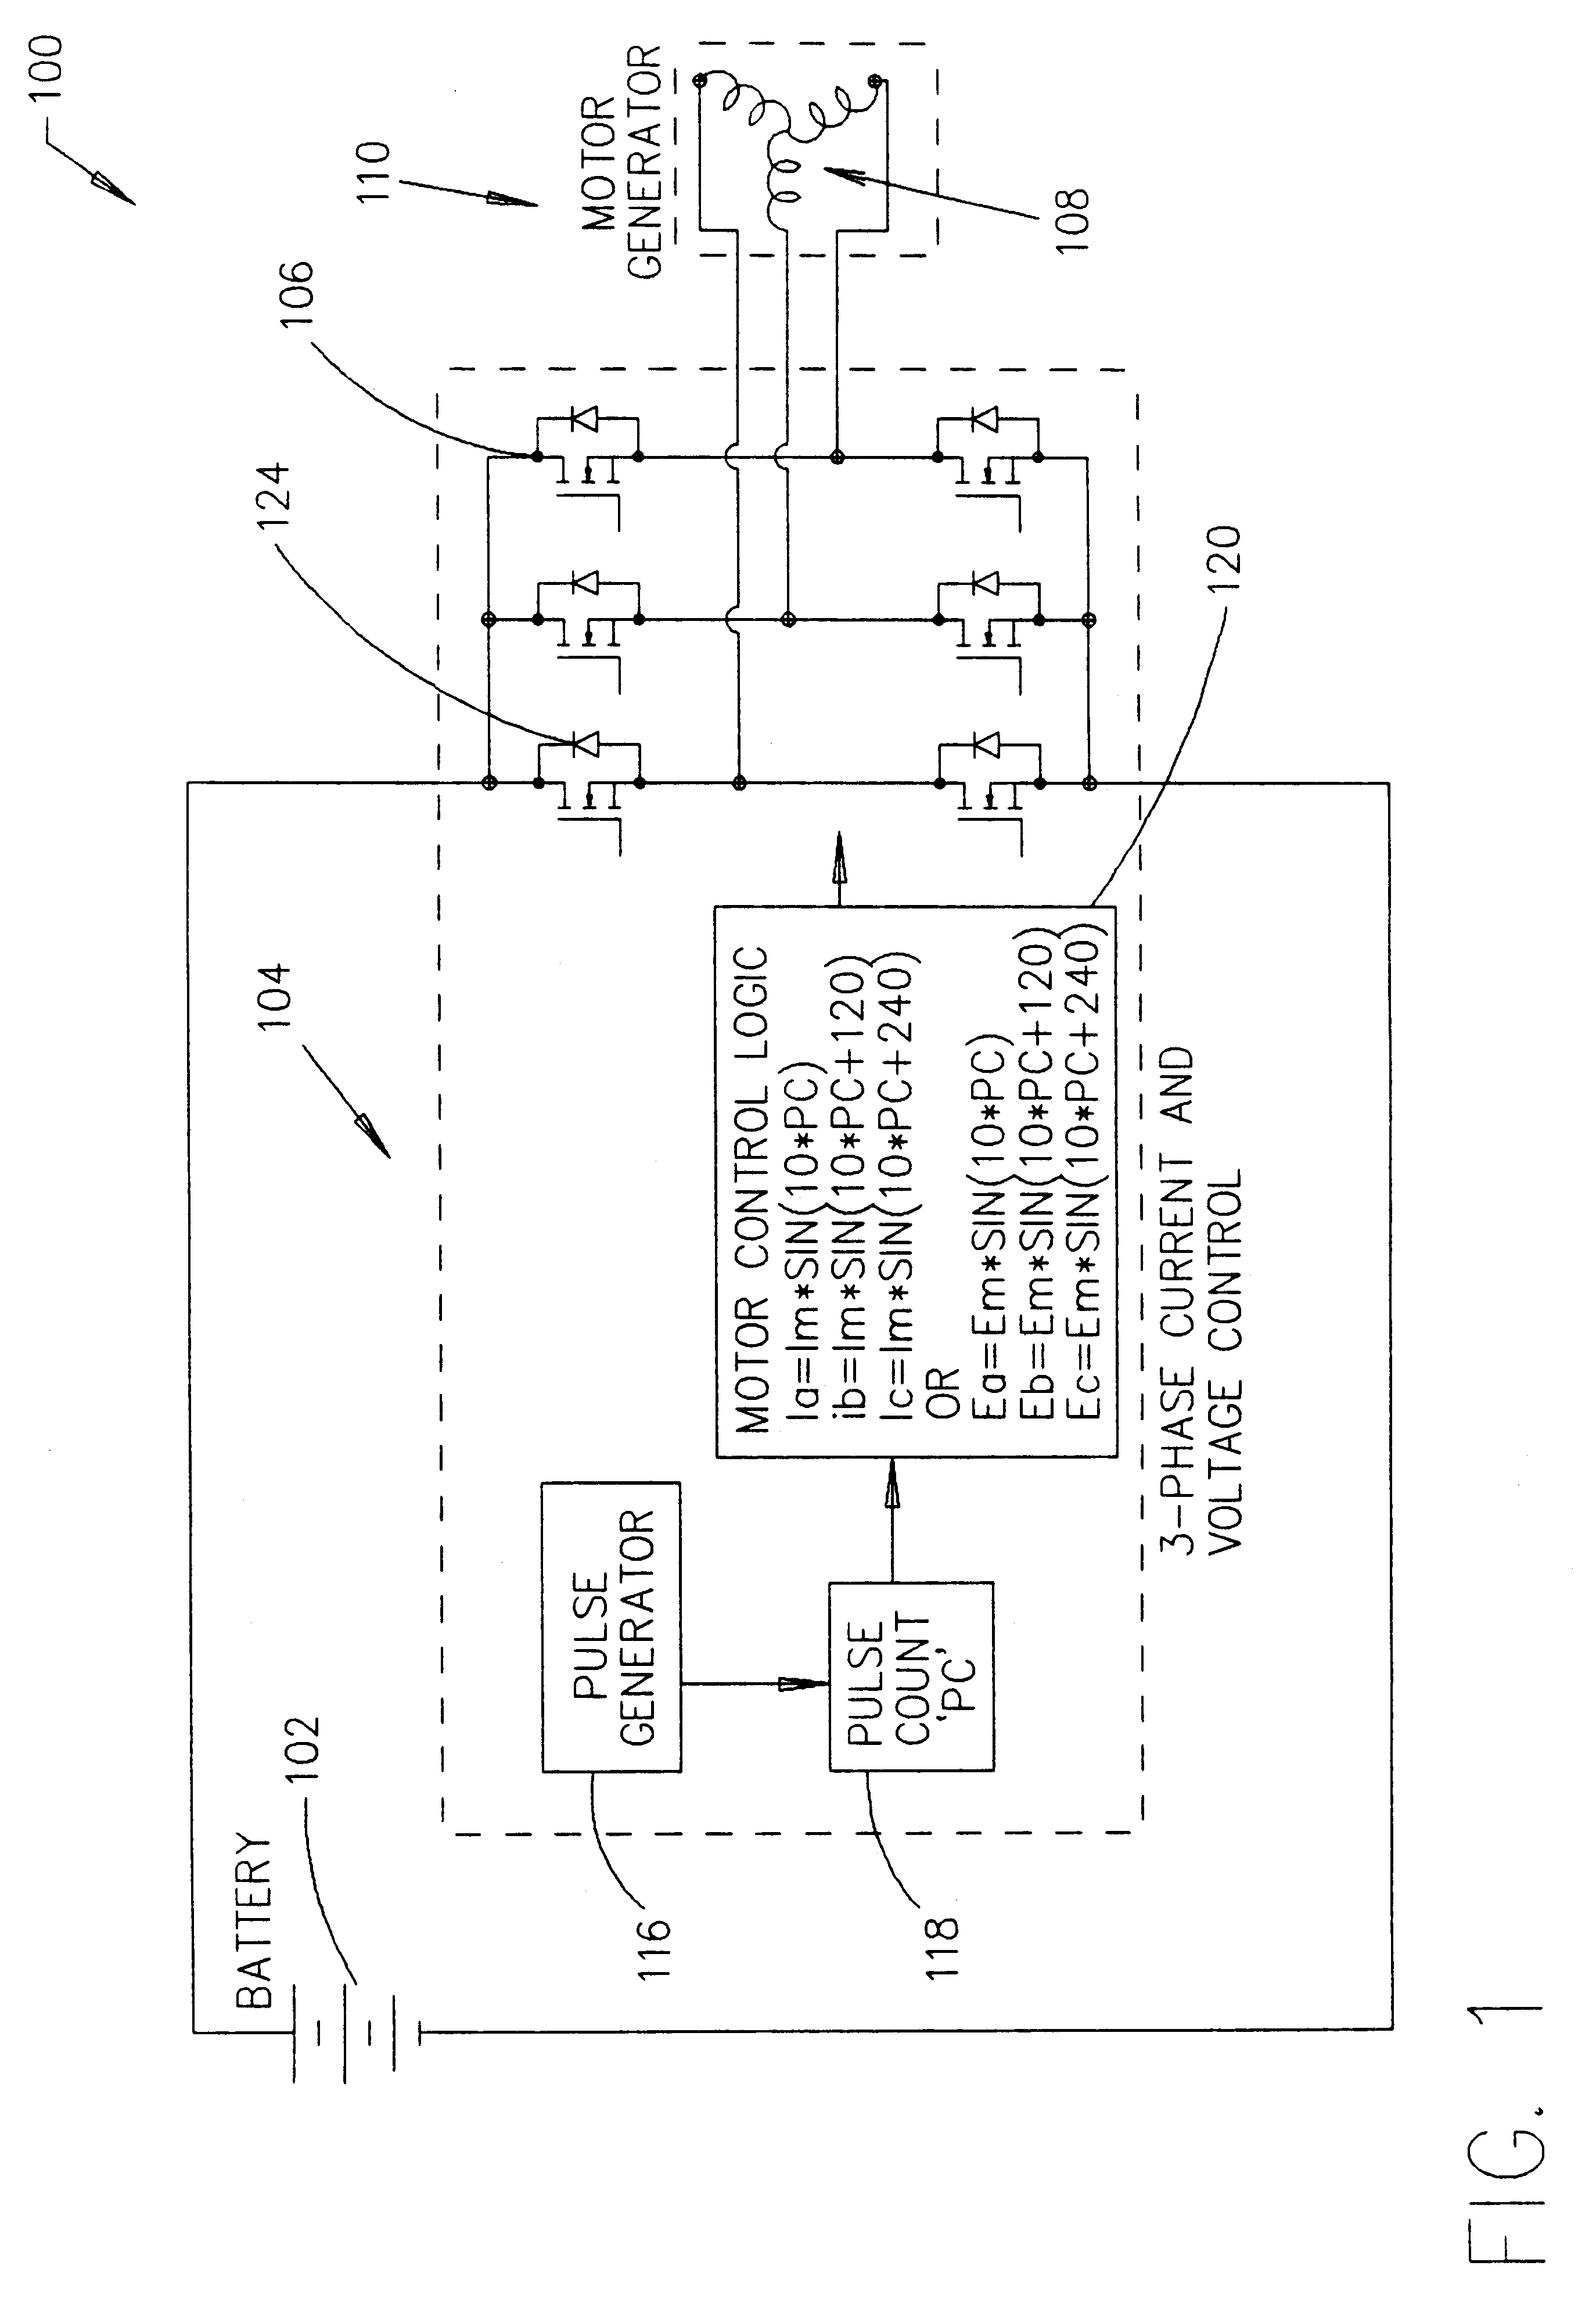 Permanent magnet brushless electric motor system and method of using same